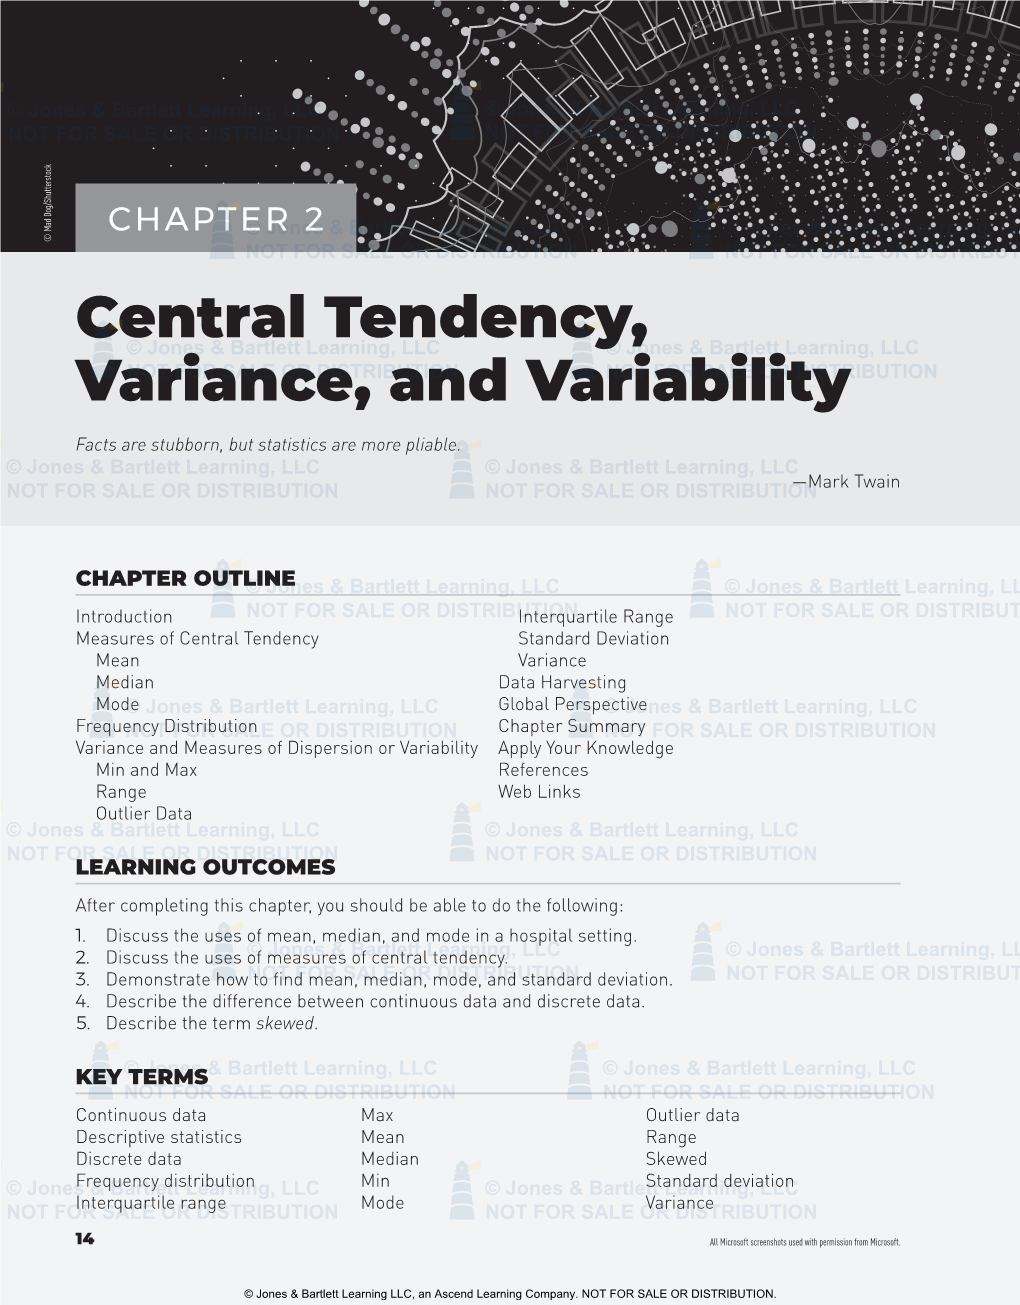 Central Tendency, Variance, and Variability